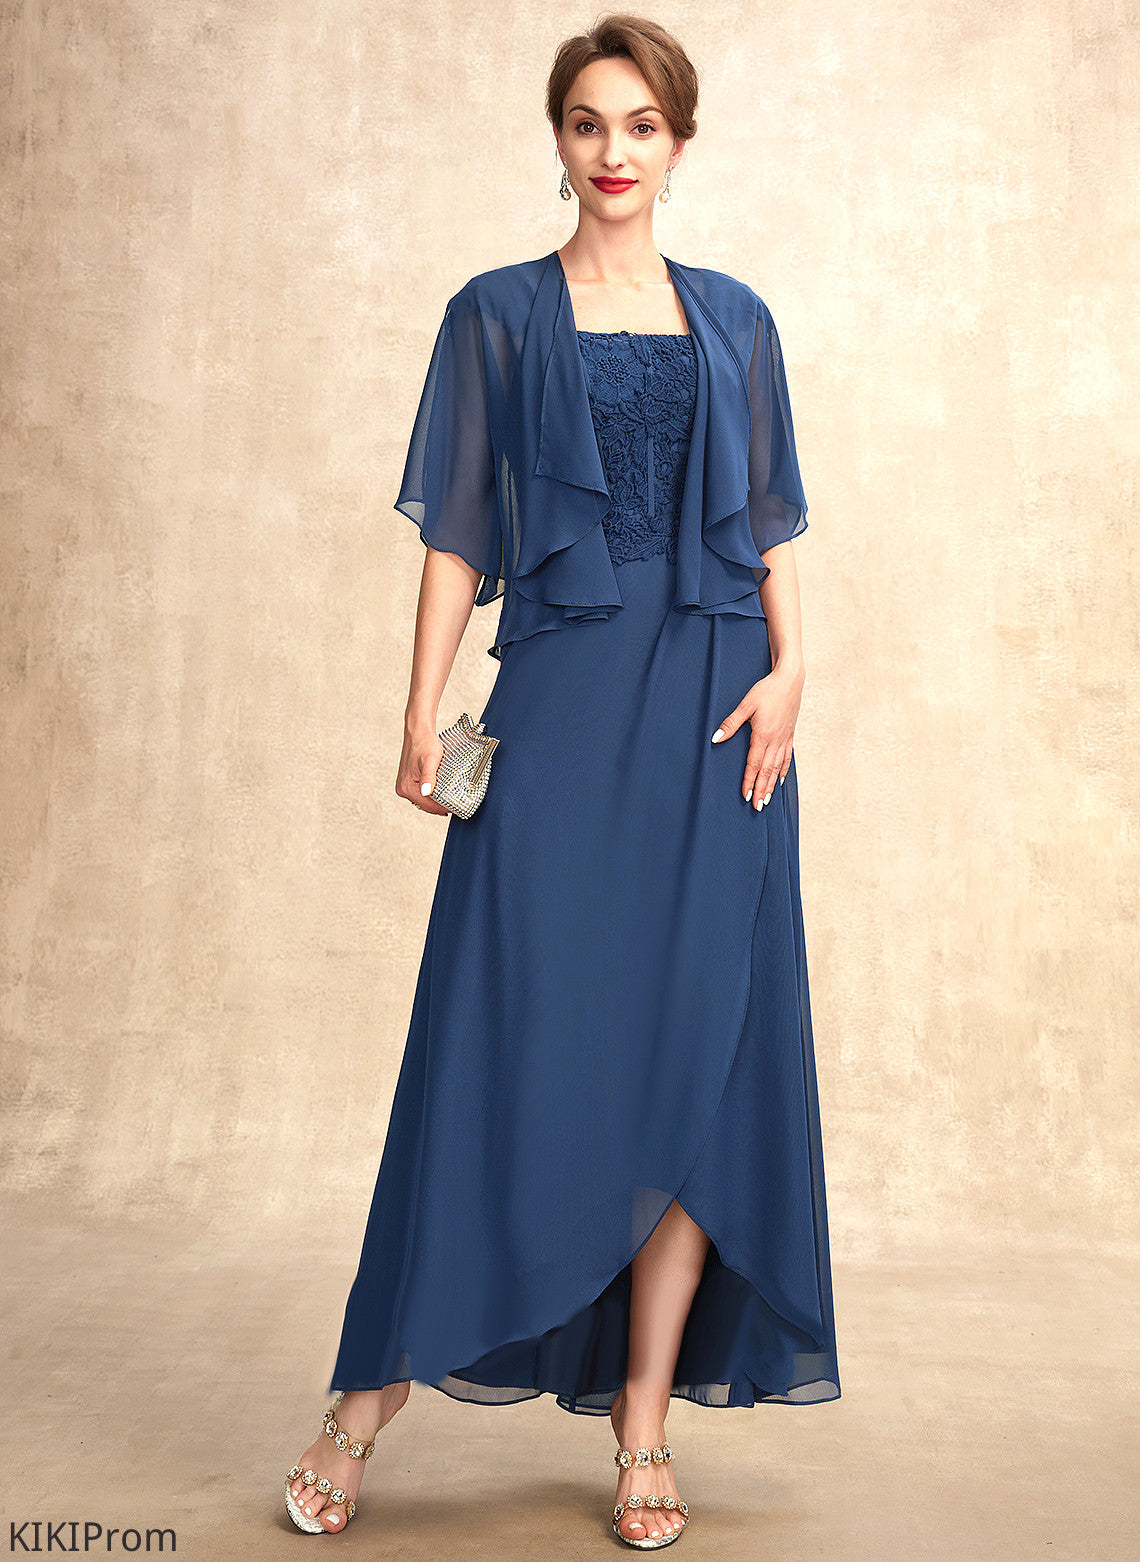 A-Line Lace of Mother of the Bride Dresses Mother Kara the Square Dress Chiffon Bride Asymmetrical Neckline